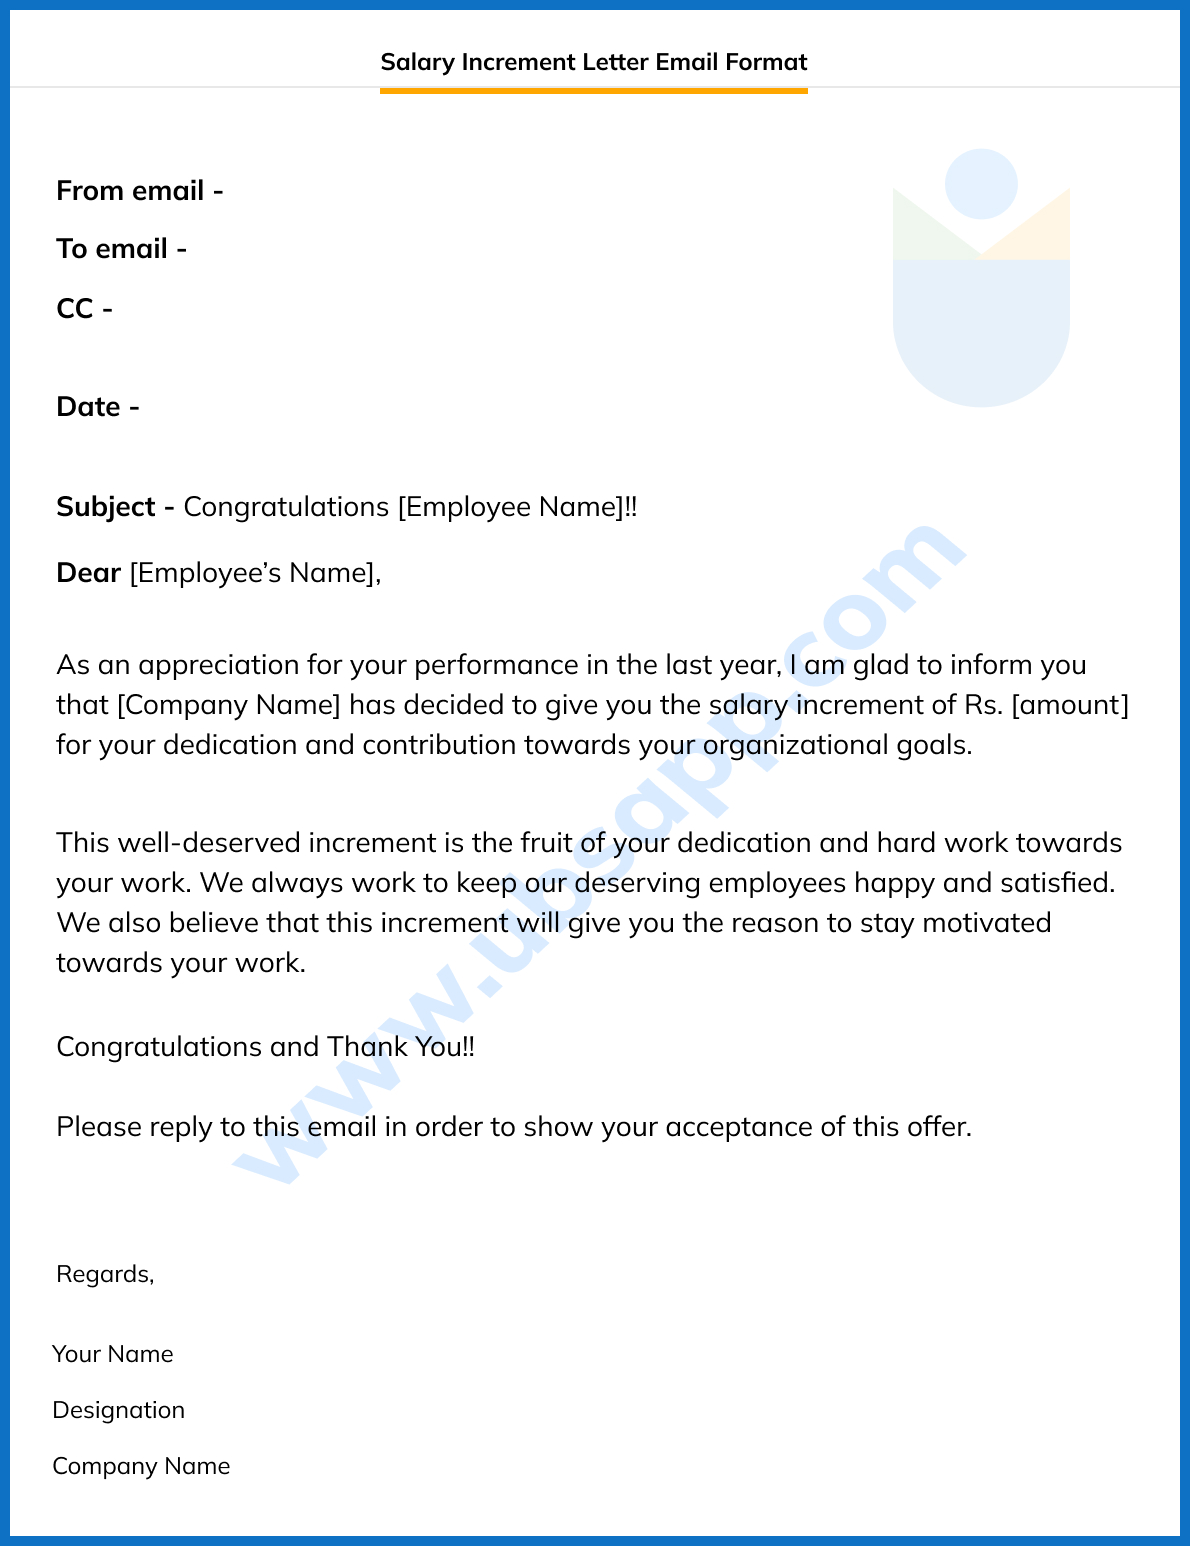 Salary Increment Letter Email Format